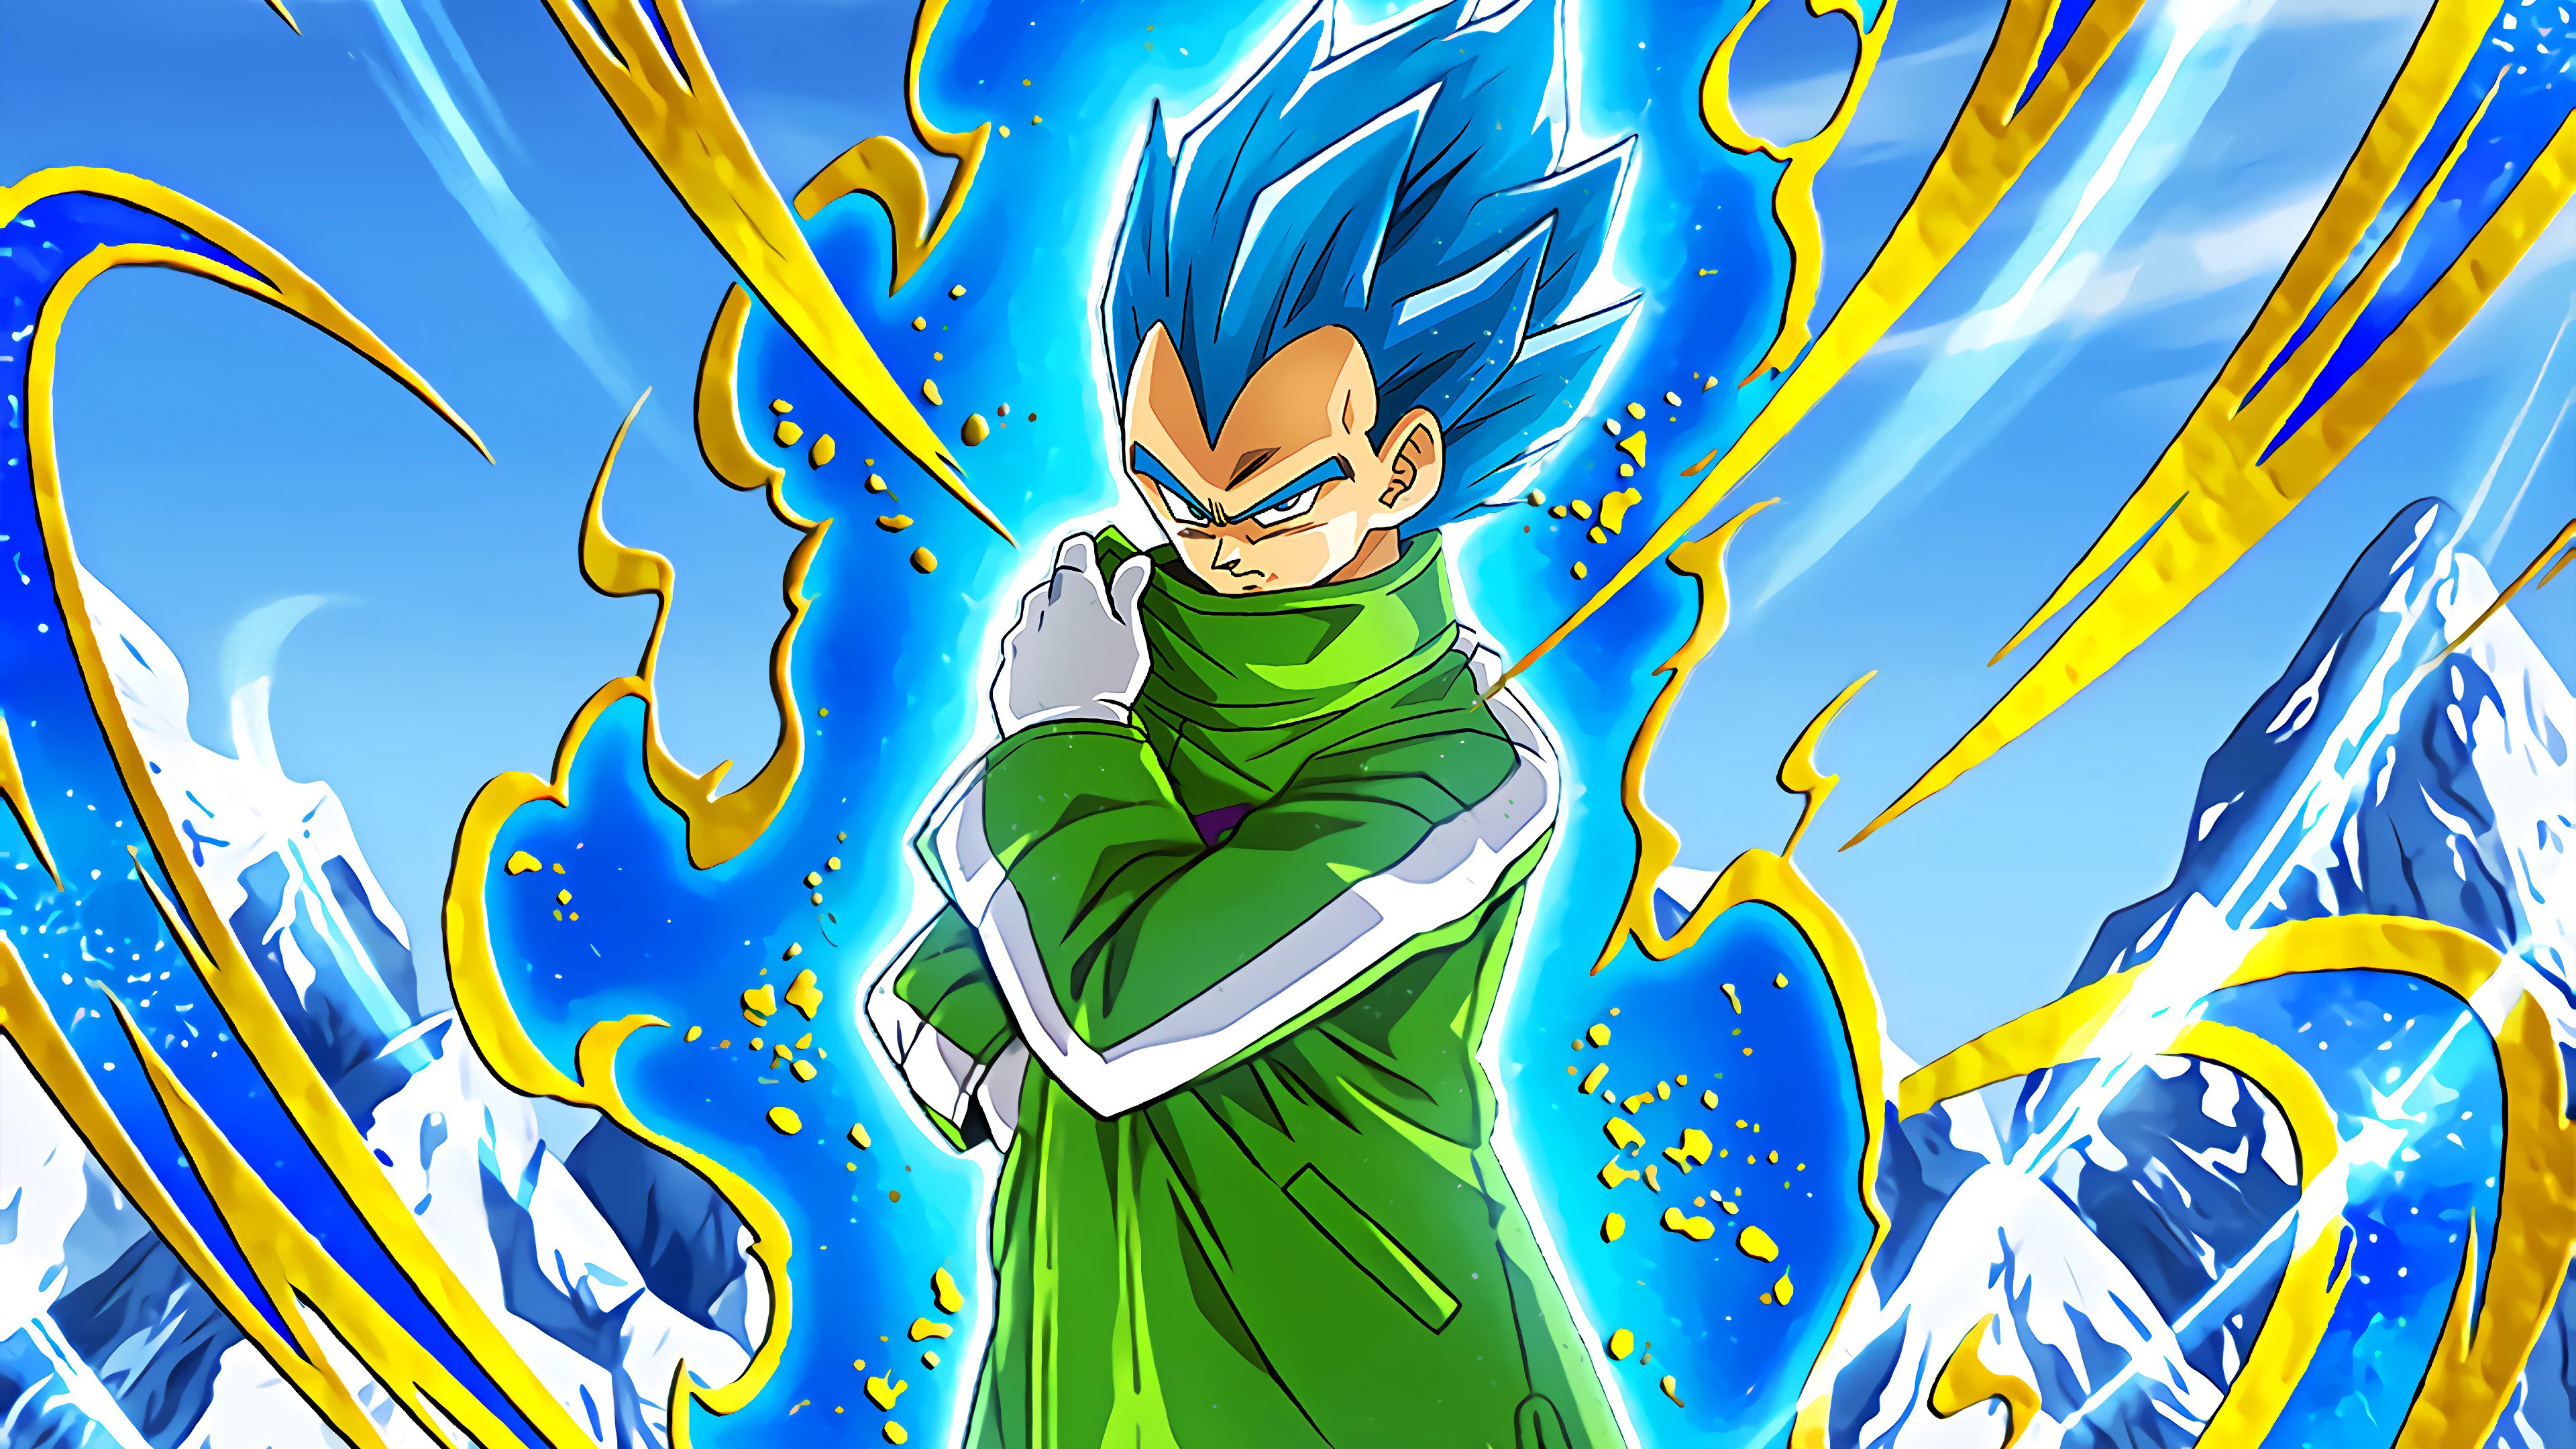 Hình nền Vegeta Dragon Balls: Indulge in the bold and dynamic style of Vegeta\'s Dragon Balls wallpaper. This image perfectly captures the essence of Vegeta\'s power and might, leaving you in awe. You won\'t be able to take your eyes off this magnificent wallpaper once you see it. Don\'t miss out on the chance to have the ultimate Saiyan warrior at your fingertips.